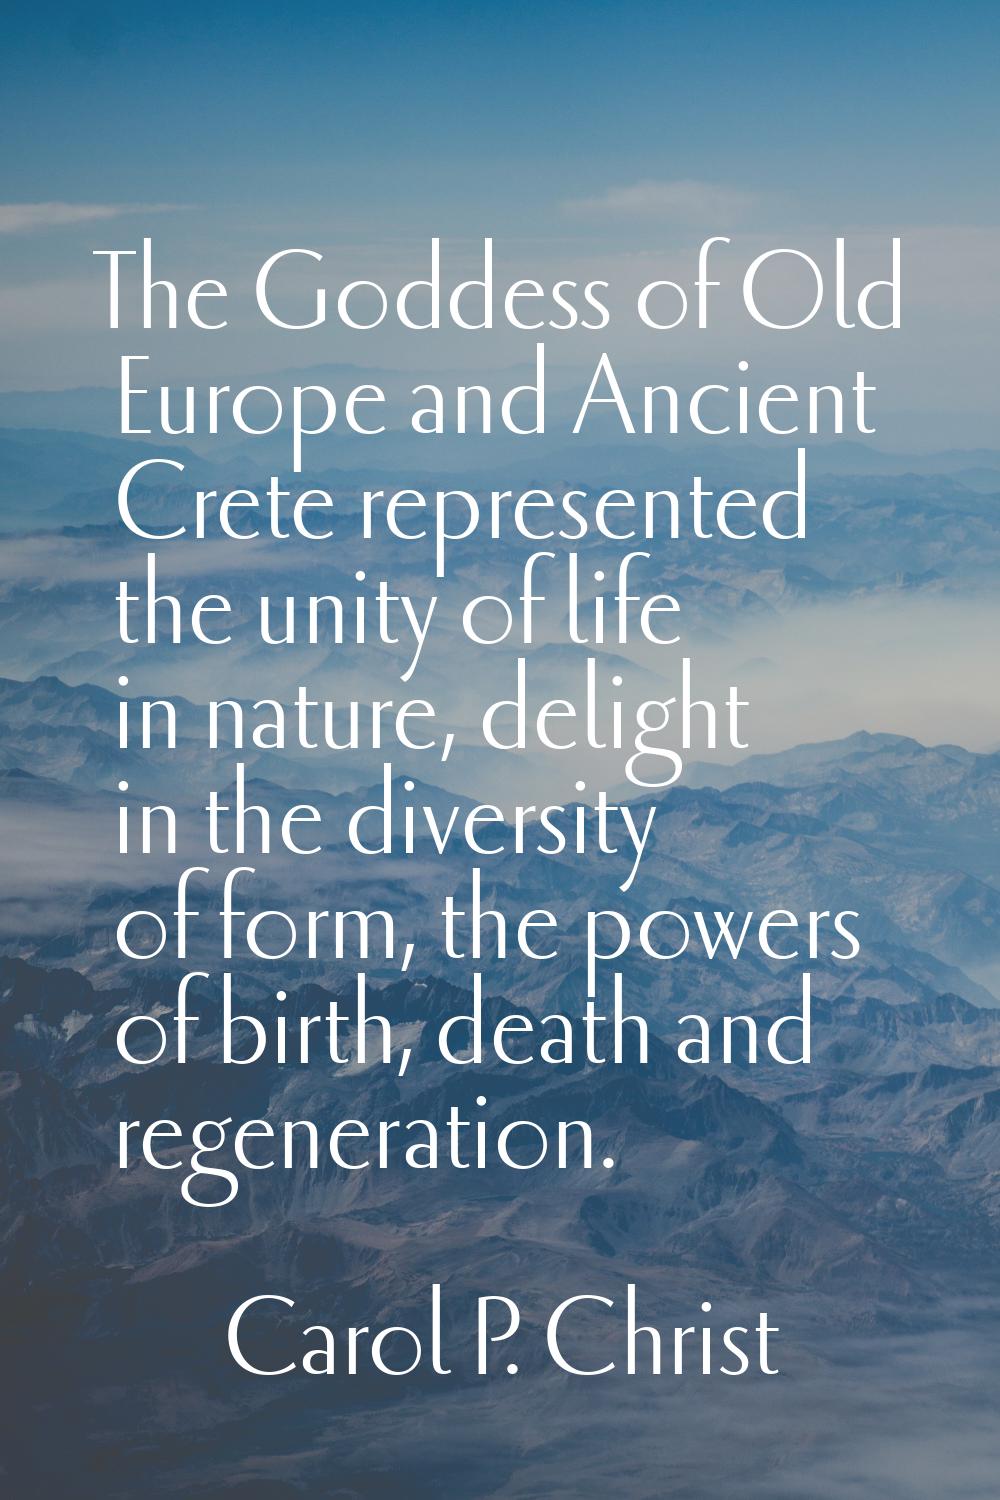 The Goddess of Old Europe and Ancient Crete represented the unity of life in nature, delight in the